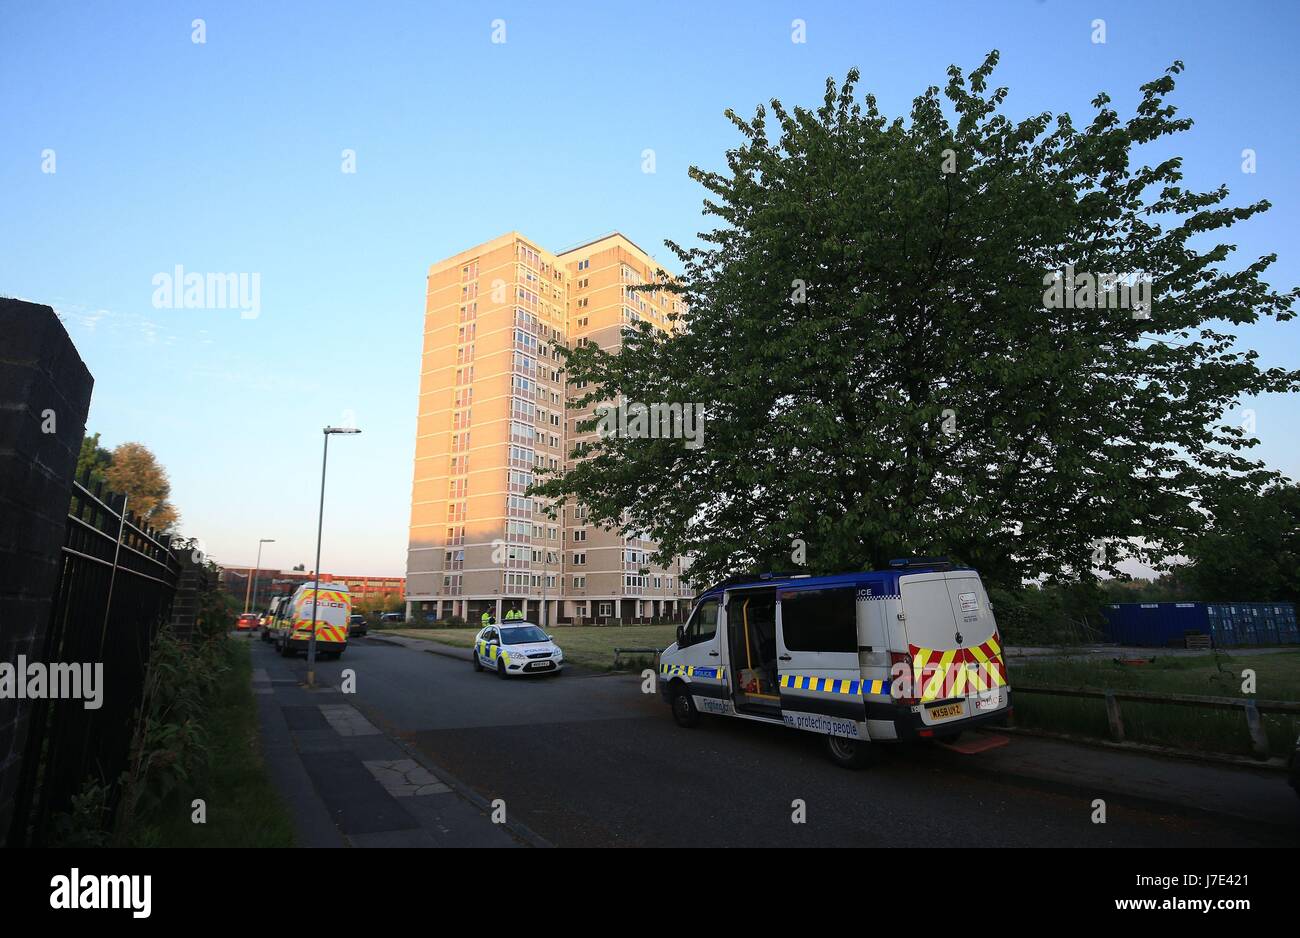 Police at the scene after they raided a block of flats (rear) in Blackley, north Manchester, following the attack on Manchester Arena where a suicide bomber killed 22 people leaving a pop concert at the venue on Monday night. Stock Photo